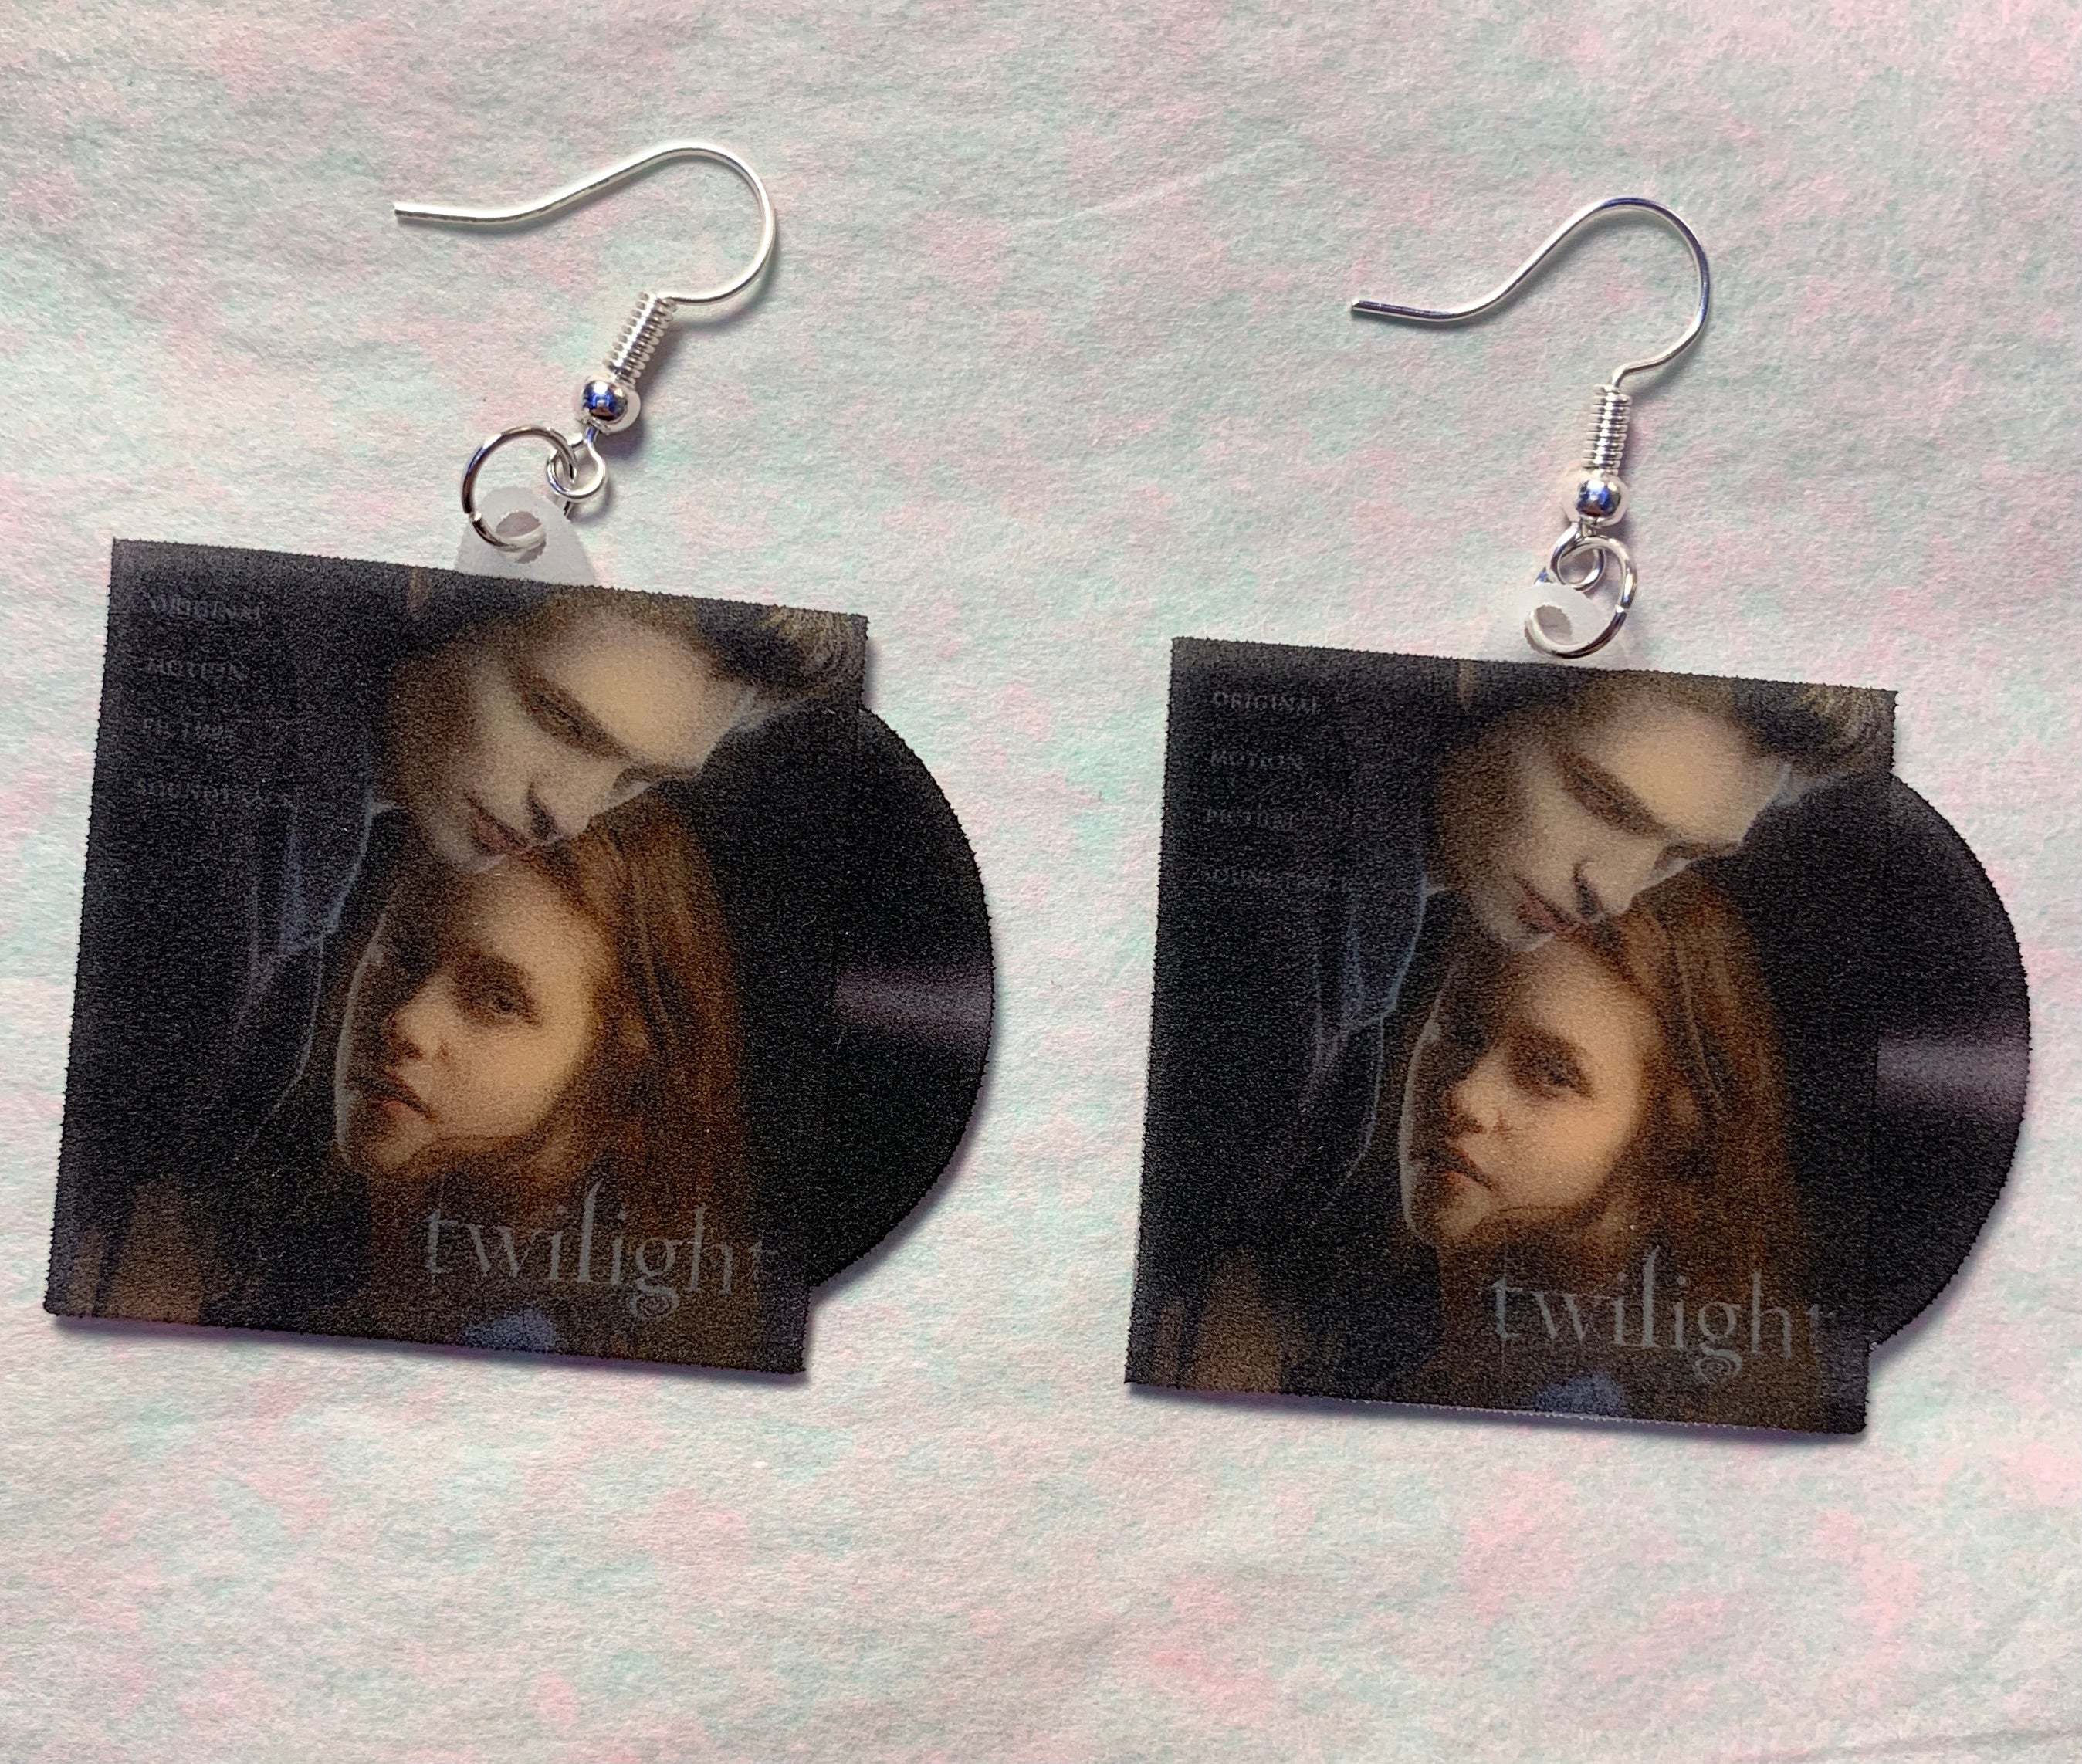 Twilight Movie Soundtrack Collection of Vinyl Albums Handmade Earrings!